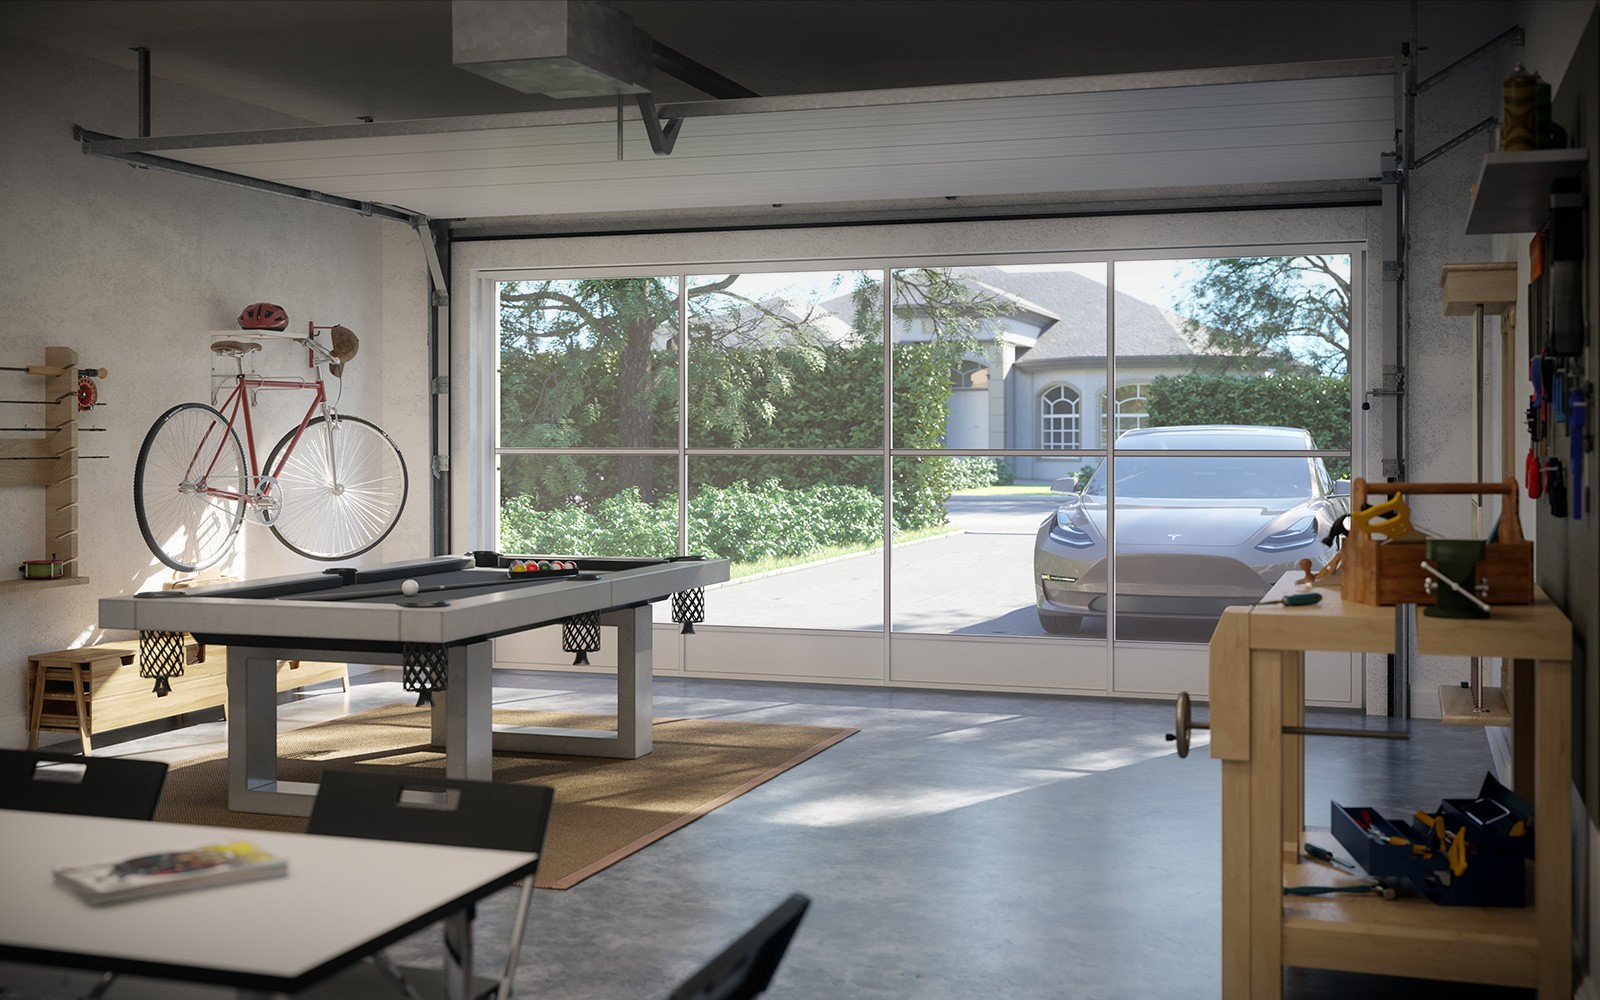 Garages can be transformed into livable spaces with an 幸运飞行艇168官方开奖历史记录查询 Eze-Breeze enclosure system.